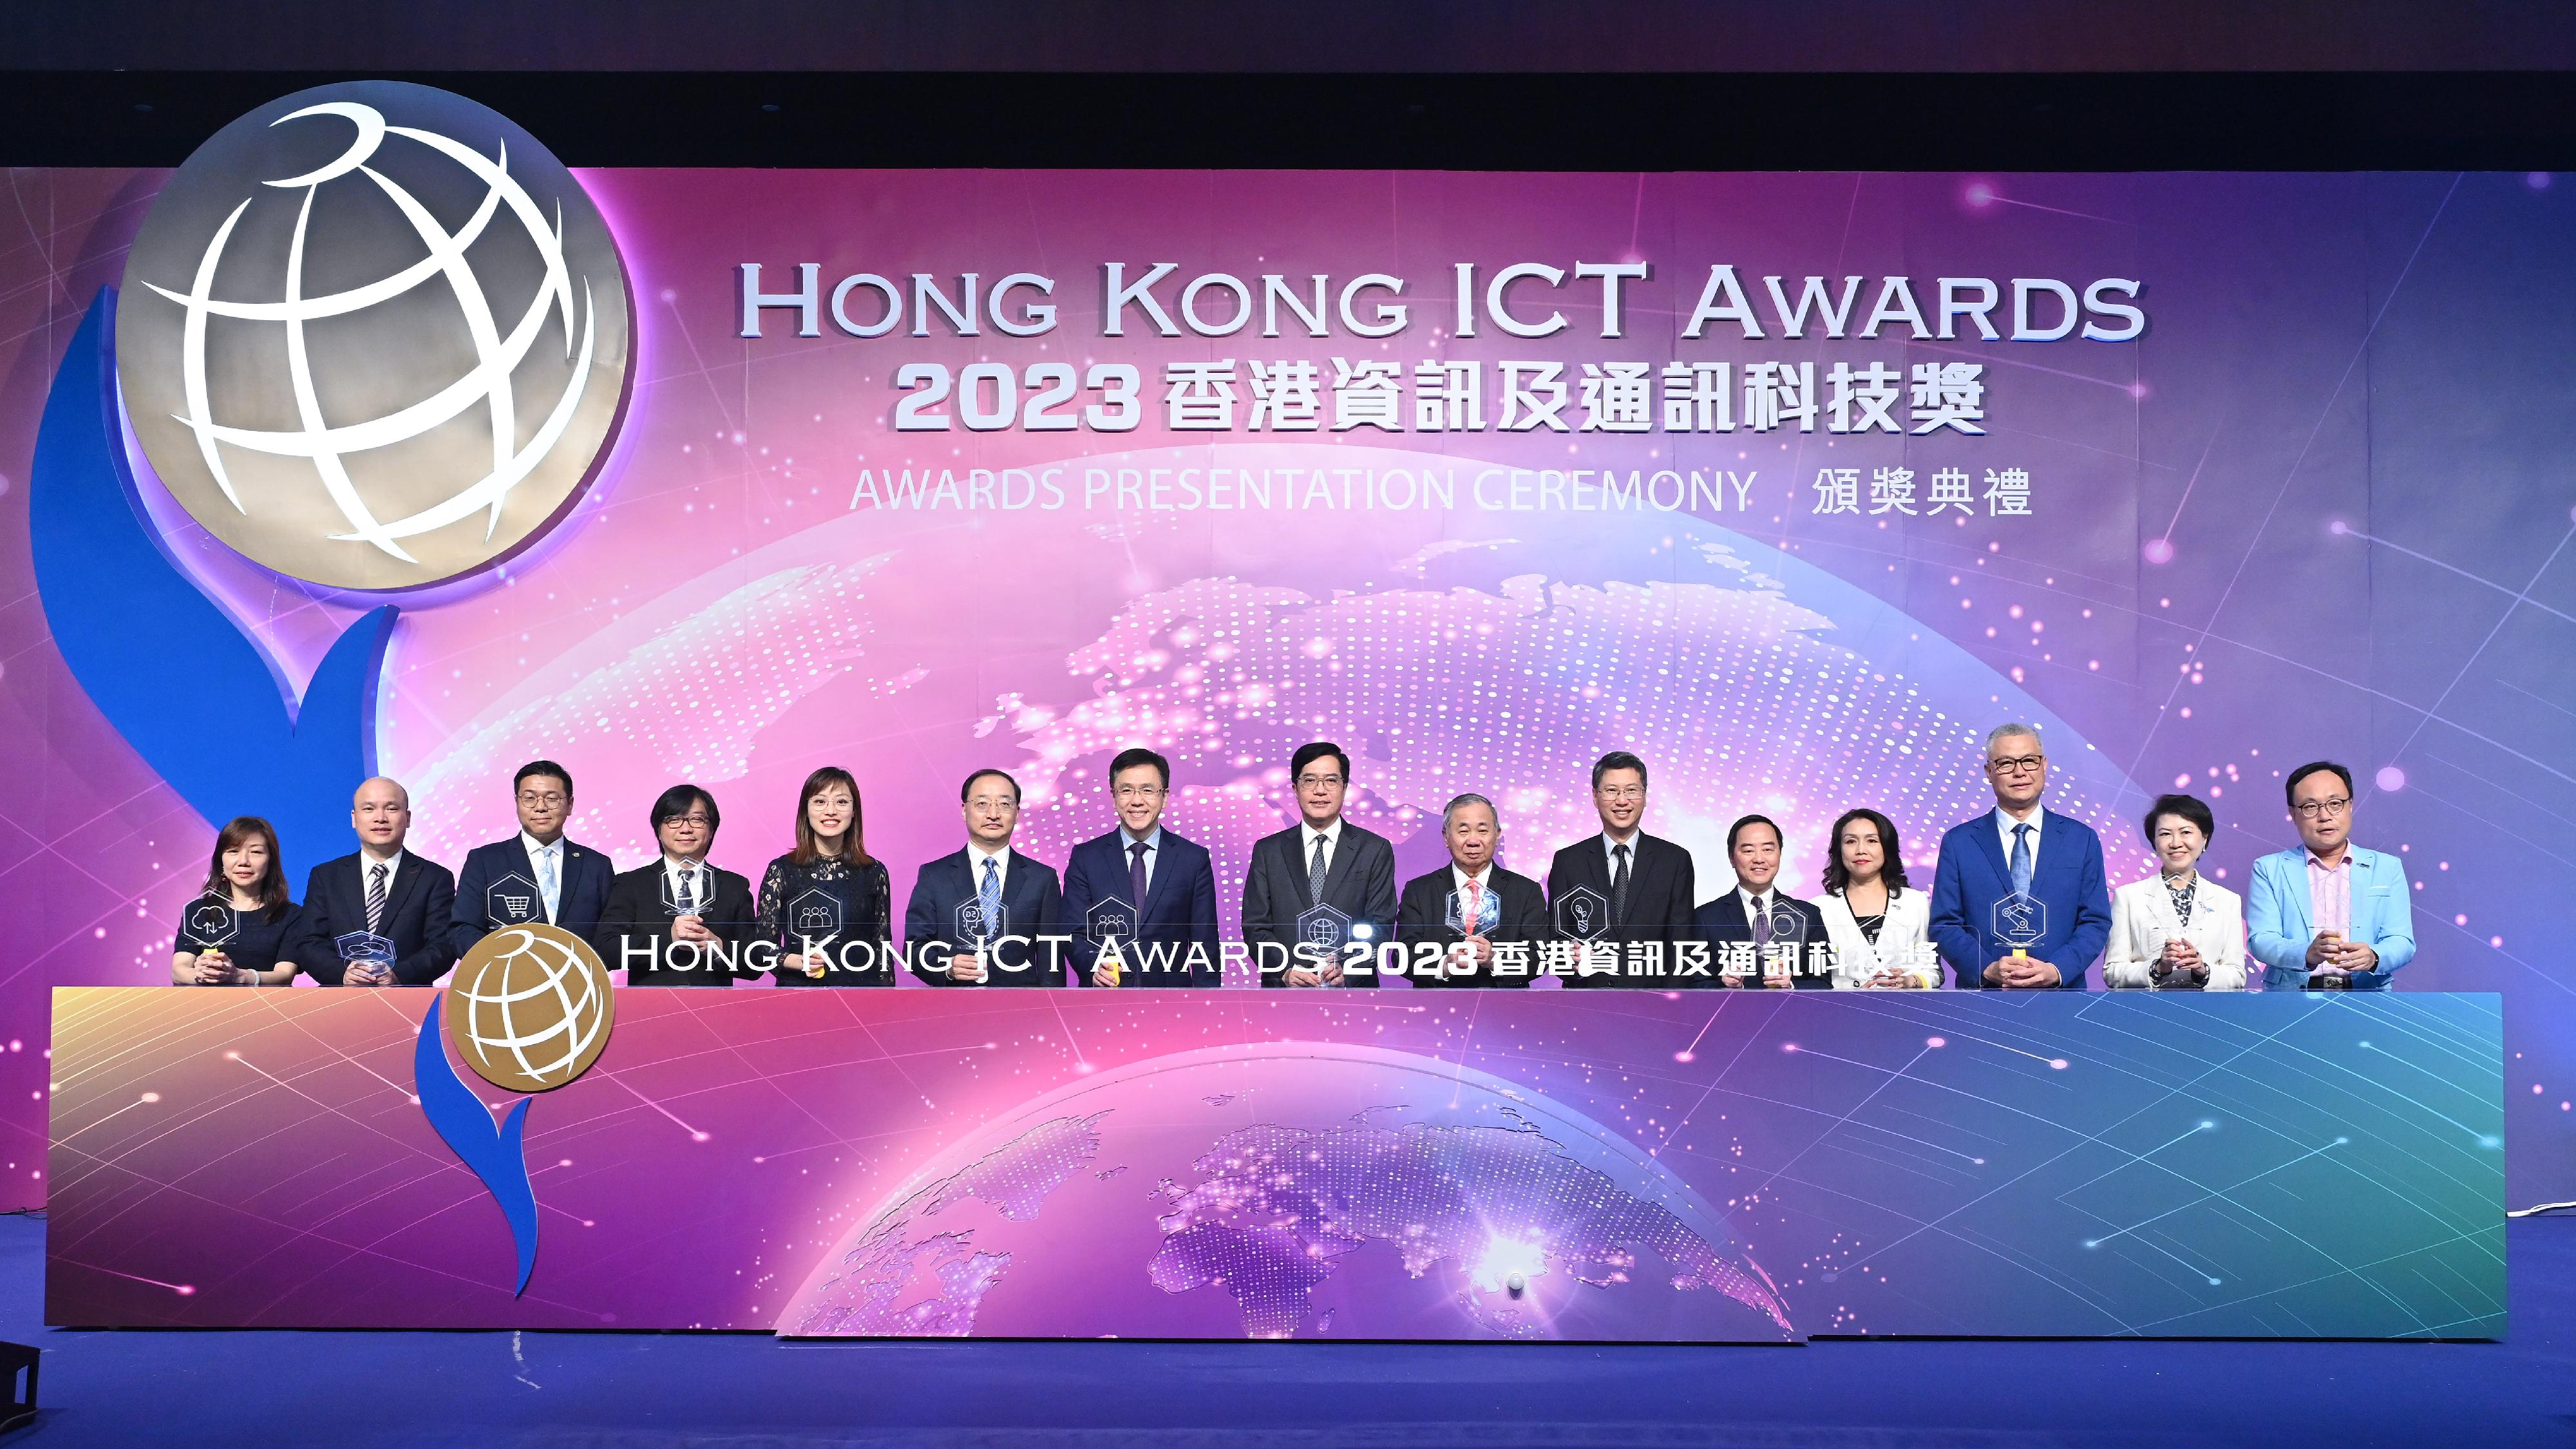 The Deputy Financial Secretary, Mr Michael Wong, attended the Hong Kong ICT Awards 2023 Awards Presentation Ceremony this evening (November 3). Photo shows (from fifth left) the Under Secretary for Innovation, Technology and Industry, Ms Lillian Cheong; the Director-General of the Department of Youth Affairs of the Liaison Office of the Central People's Government in the Hong Kong Special Administrative Region, Mr Zhang Zhihua;  the Secretary for Innovation, Technology and Industry, Professor Sun Dong; Mr Wong; the Chairman of the Hong Kong ICT Awards 2023 Grand Judging Panel, the President of City University of Hong Kong, Professor Freddy Boey; the Permanent Secretary for Innovation, Technology and Industry, Mr Eddie Mak; the Government Chief Information Officer, Mr Tony Wong, and other guests at the ceremony.